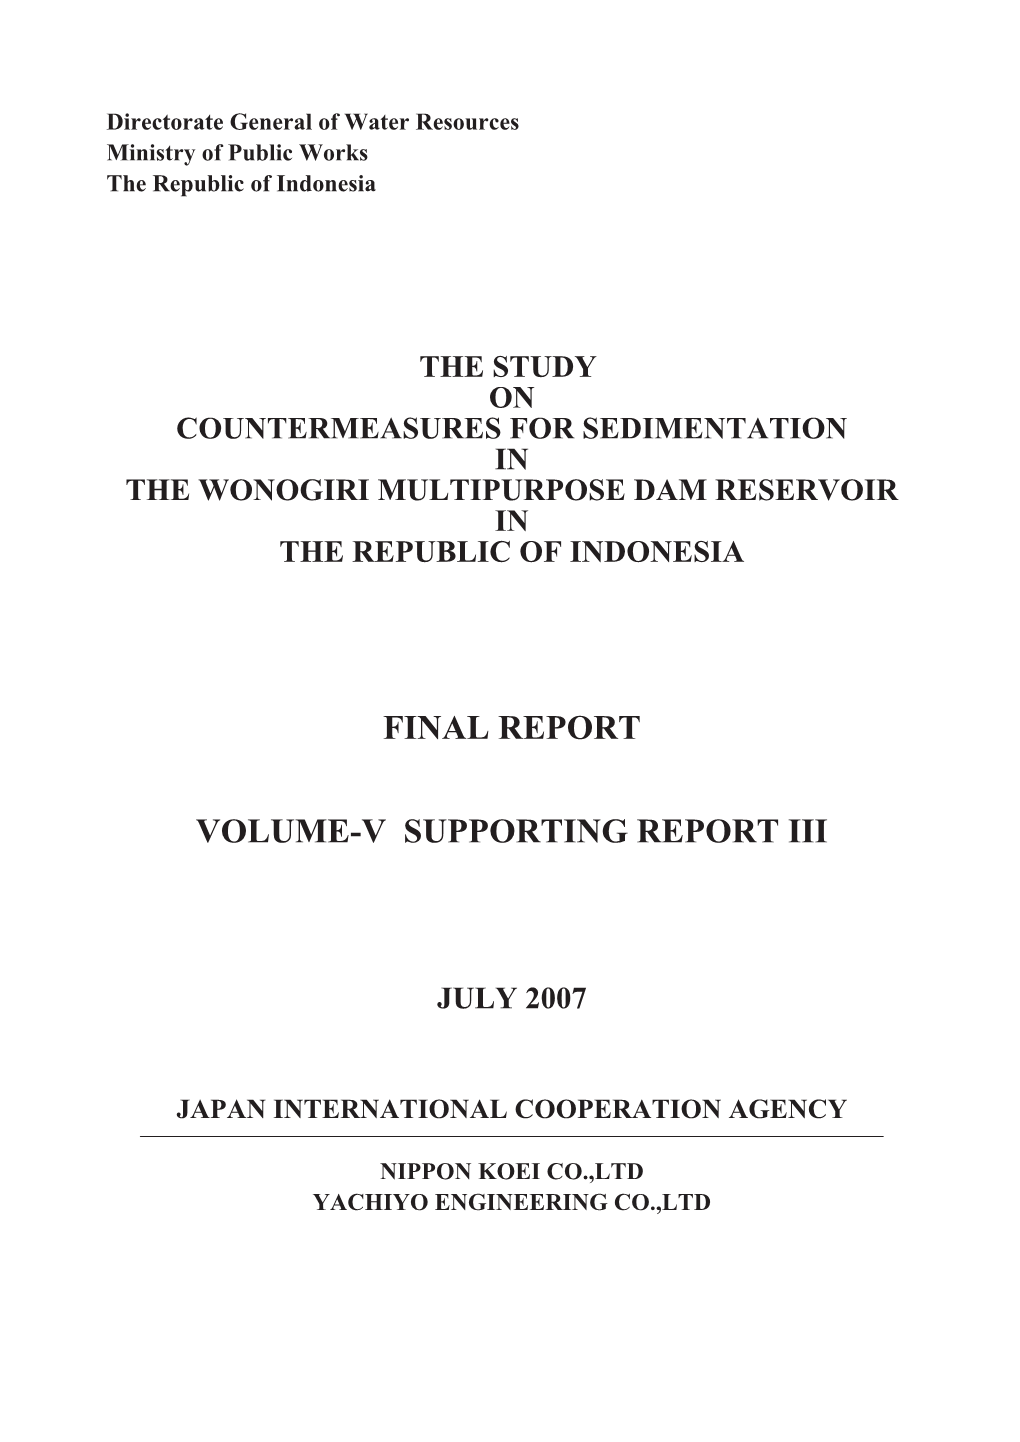 Final Report Volume-V Supporting Report